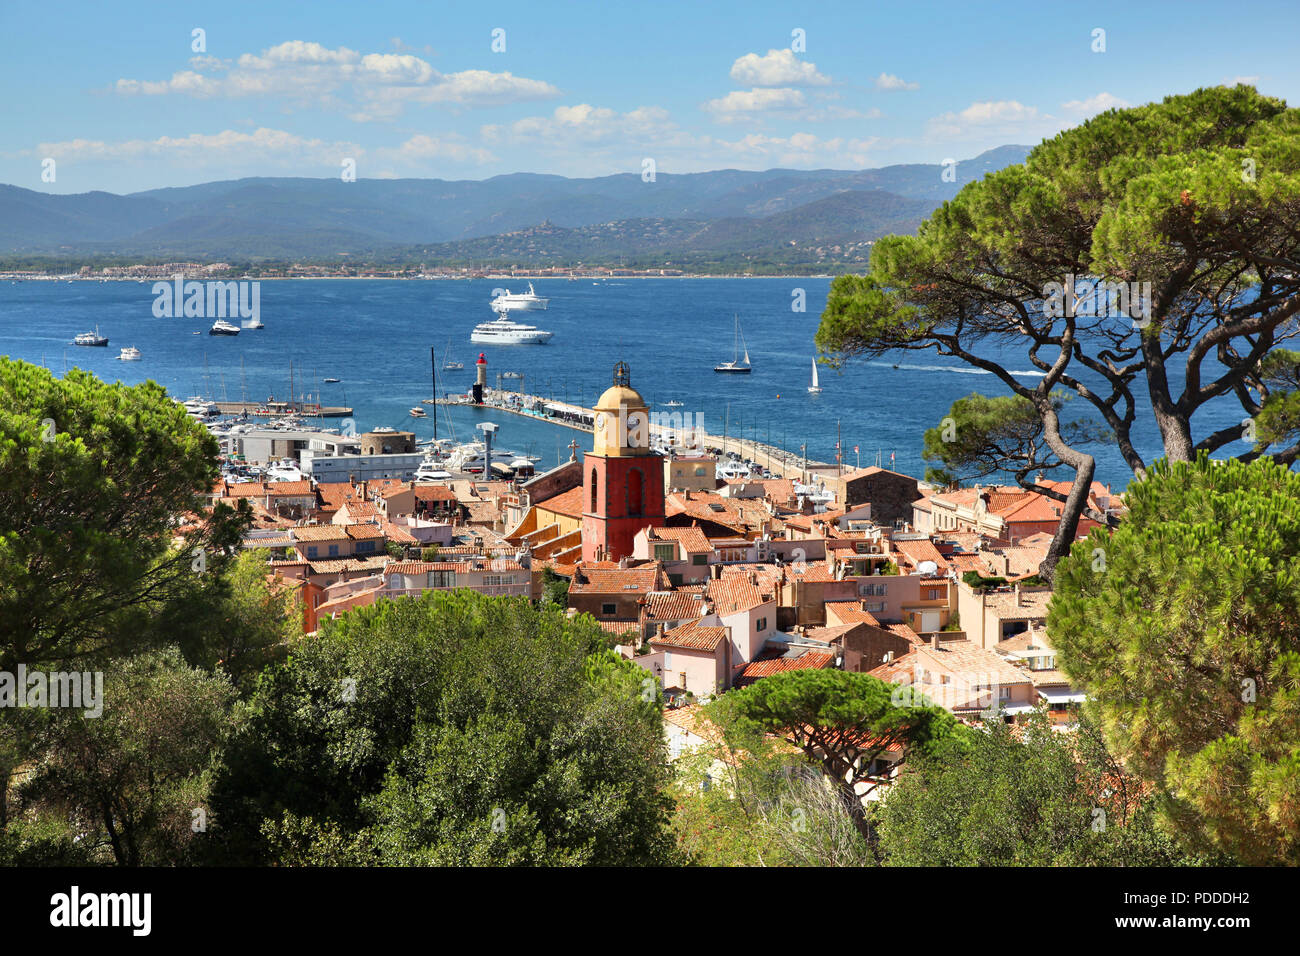 Aerial view of old town and harbor of St Tropez France Stock Photo